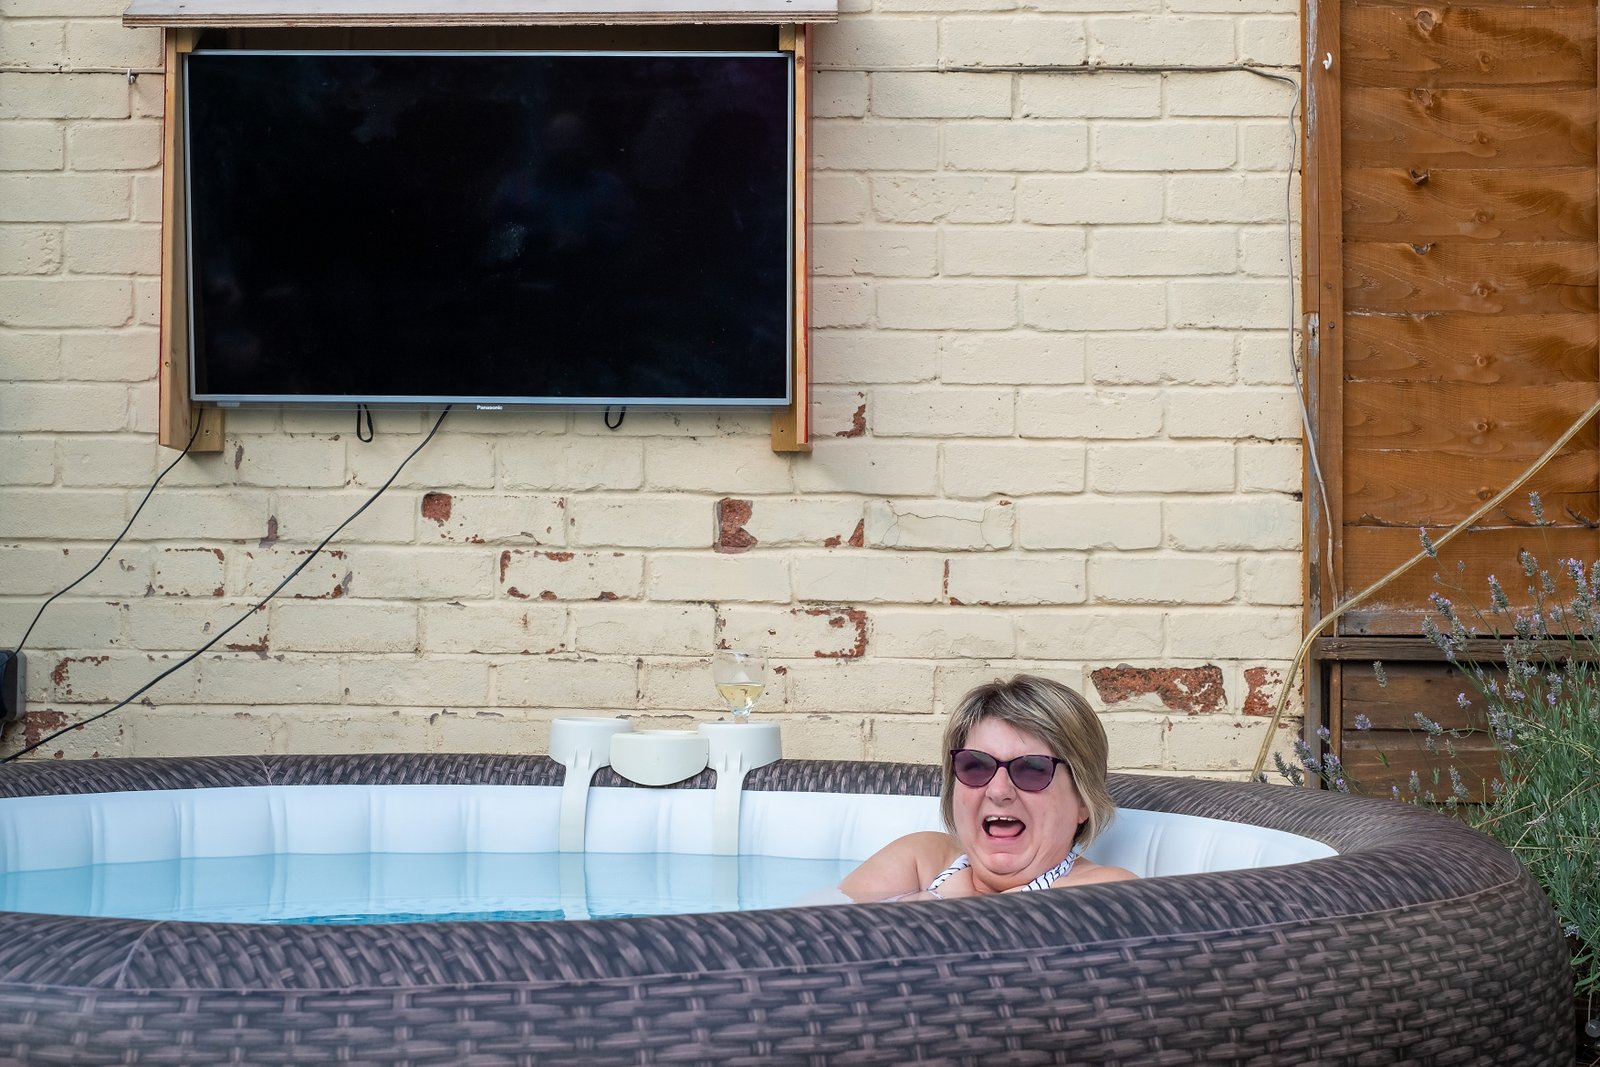 A white woman in a hot tub wearing sunglasses, only her head and shoulders in view, is laughing in the direction of the camera.